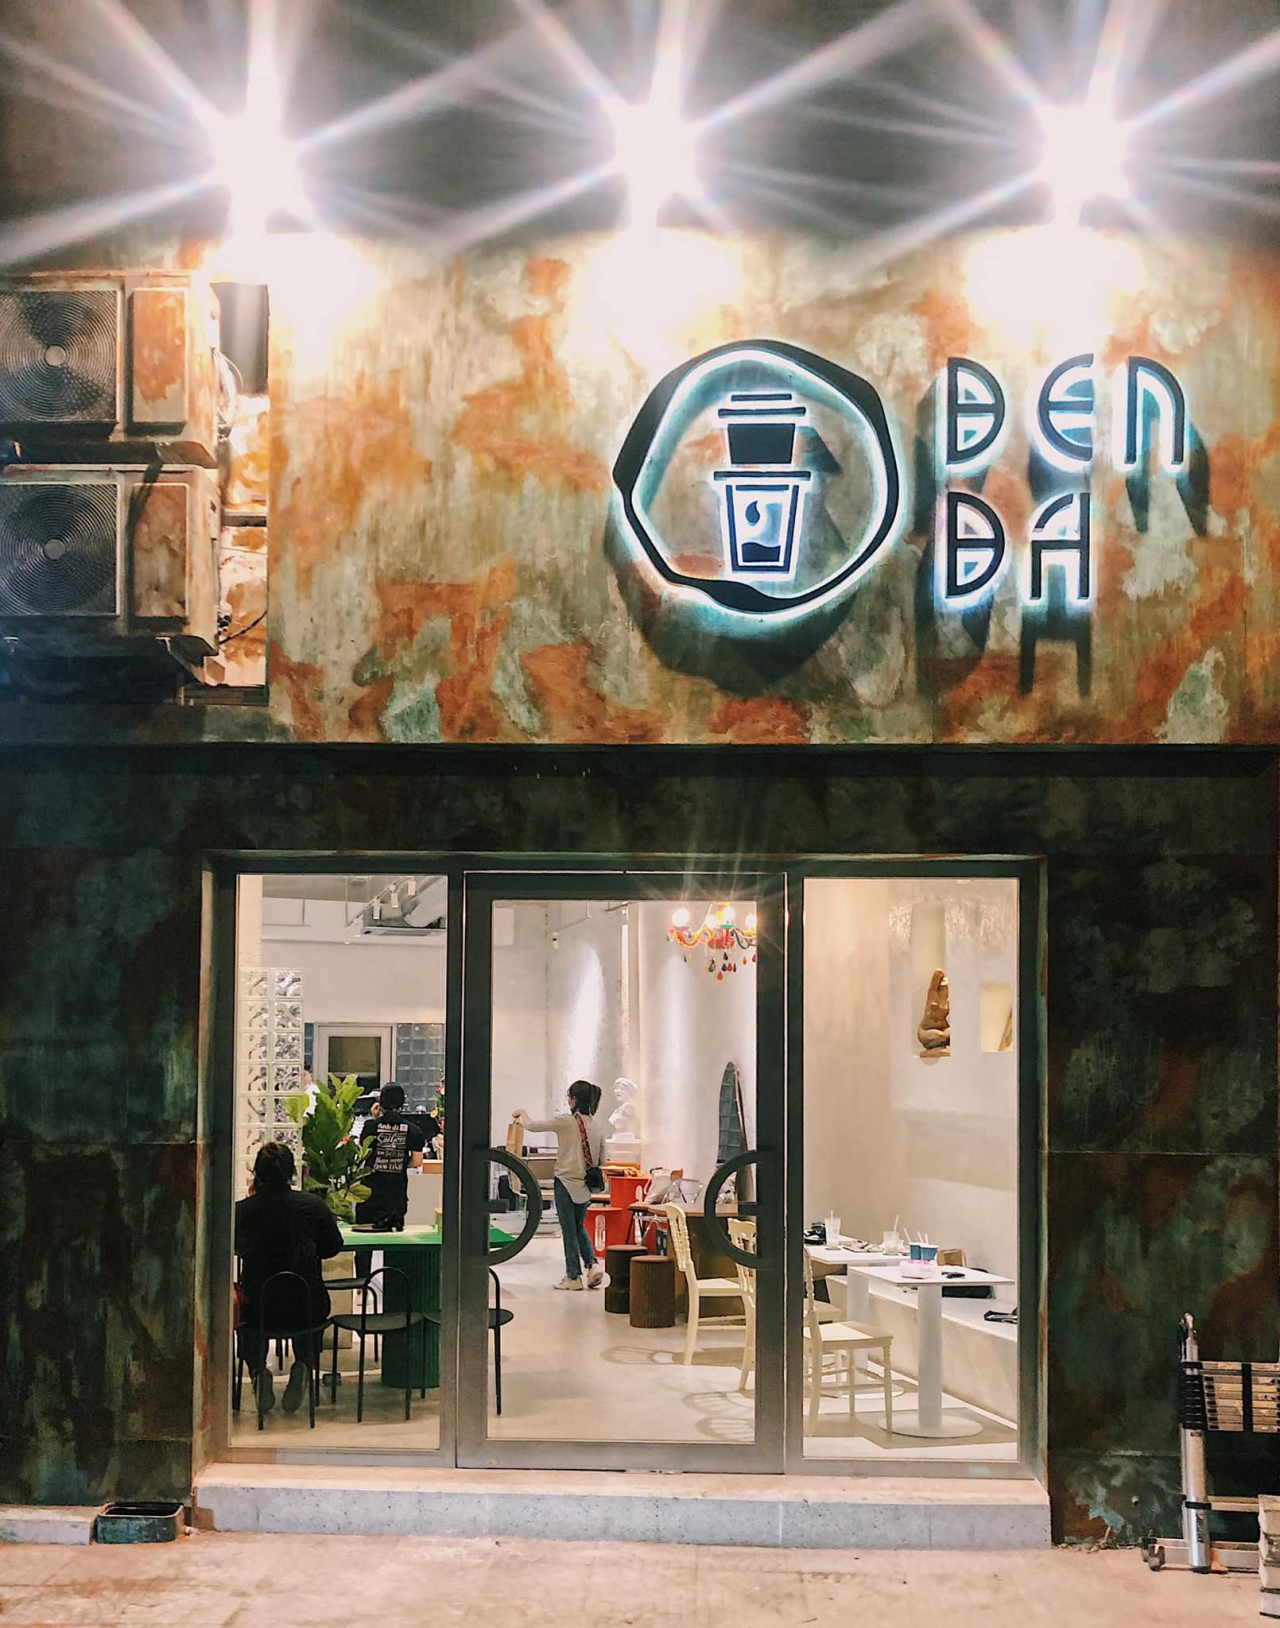 Get Lost In Den Da Coffee – The Oldest Cafe In The Heart Of Ho Chi Minh City  | Vietnam Times